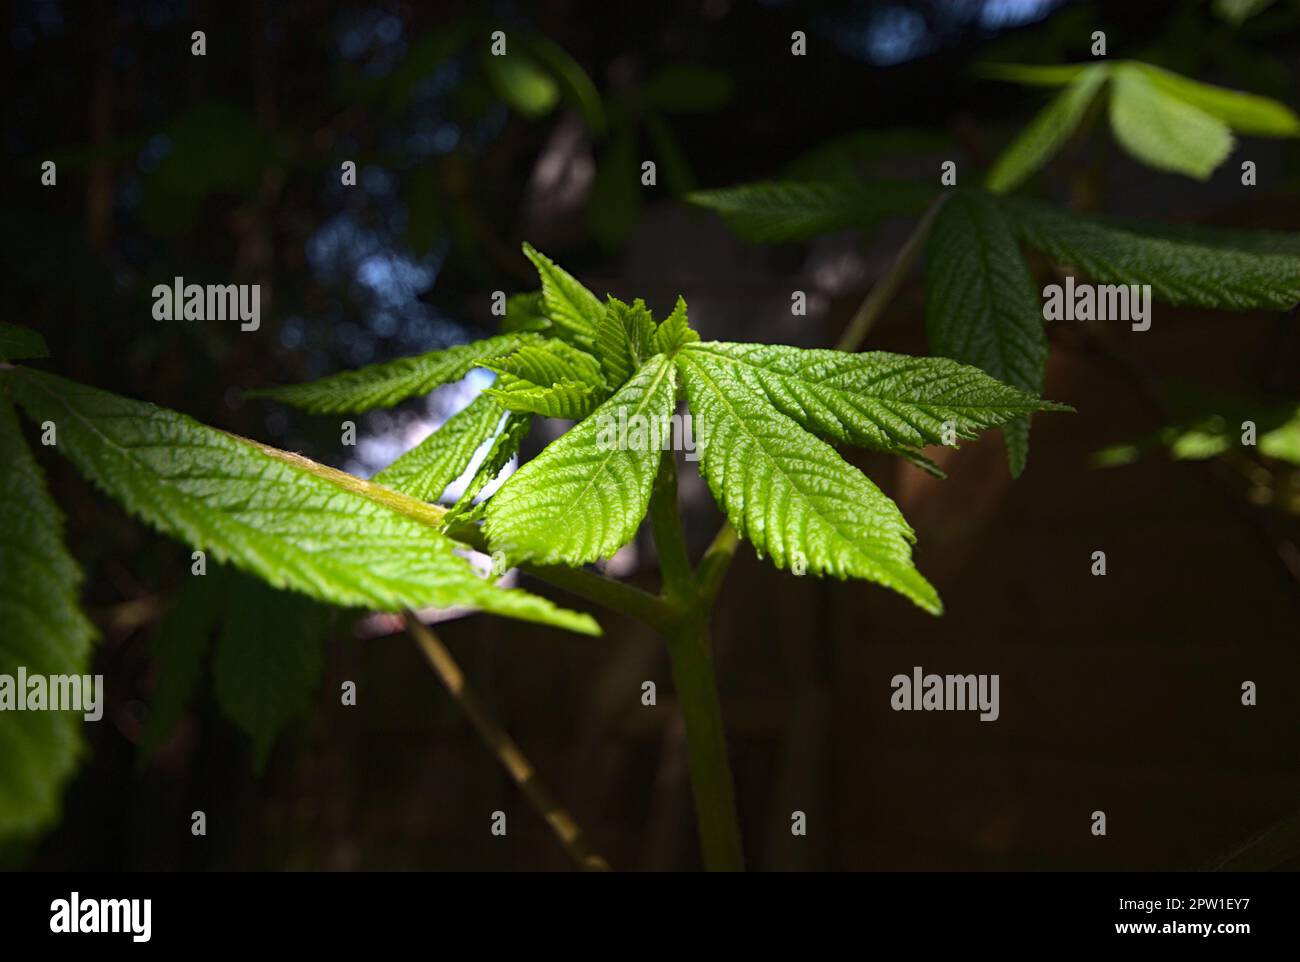 Horse chestnut leaf, fresh spring growth with vignette. Stock Photo